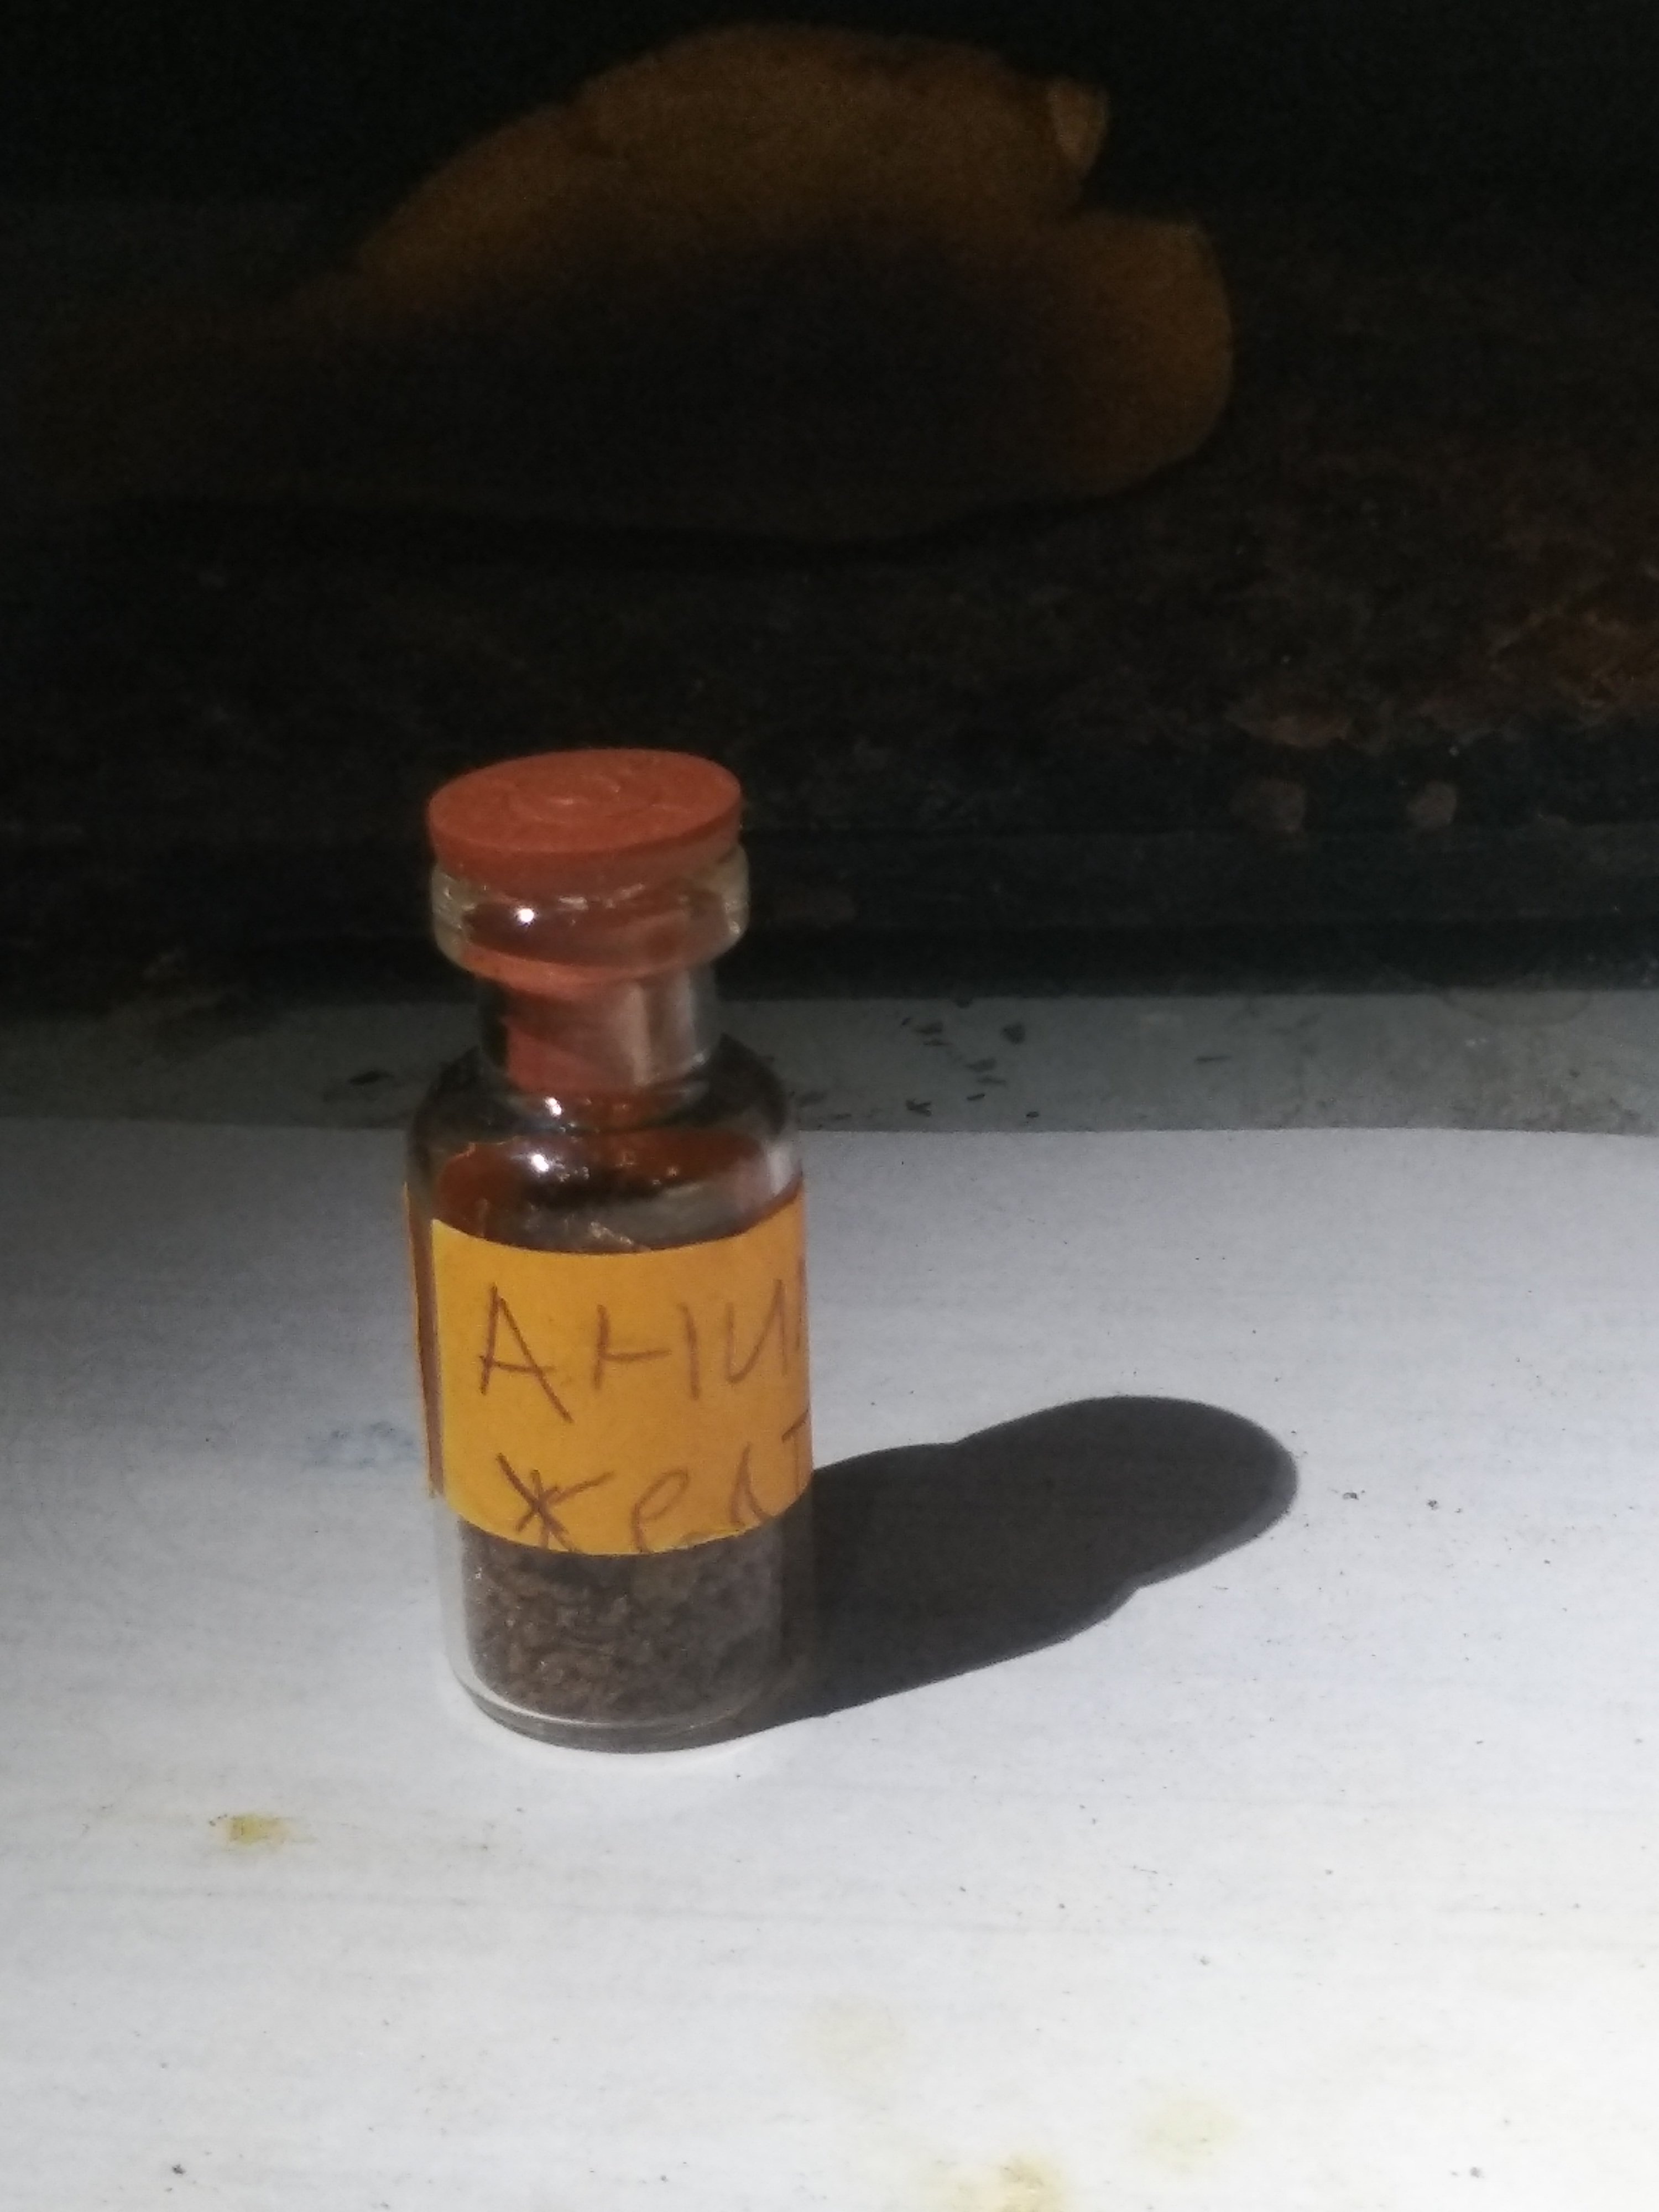 Synthesis of Aniline yellow.   